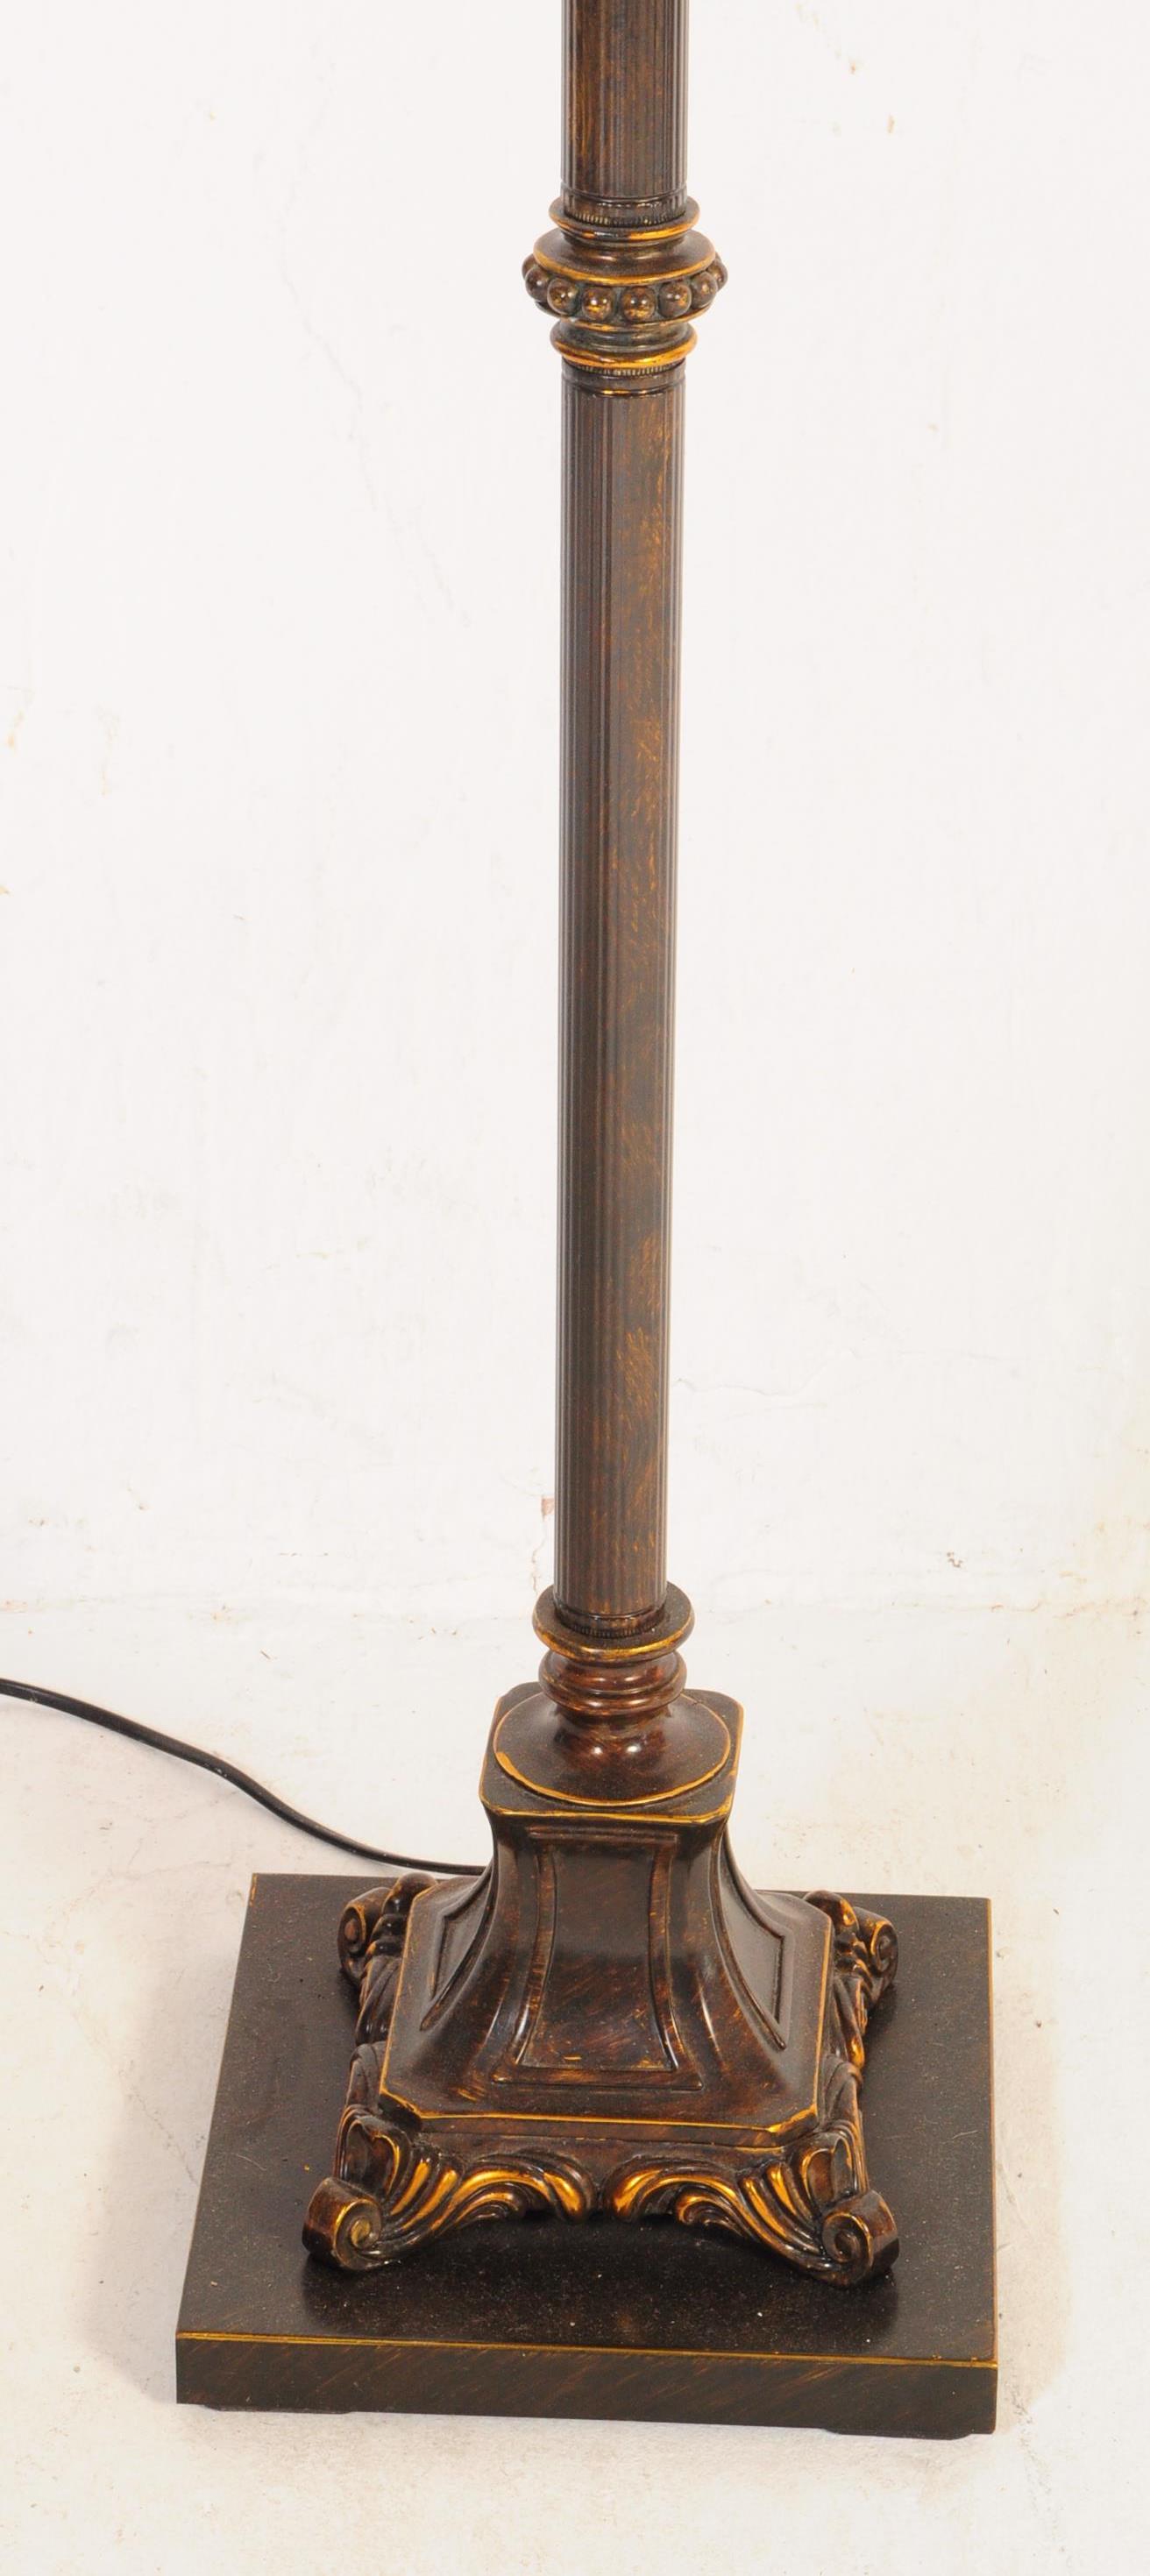 A PAIR OF 20TH CENTURY REGENCY STYLE FLOOR AND TABLE LAMPS - Image 3 of 5